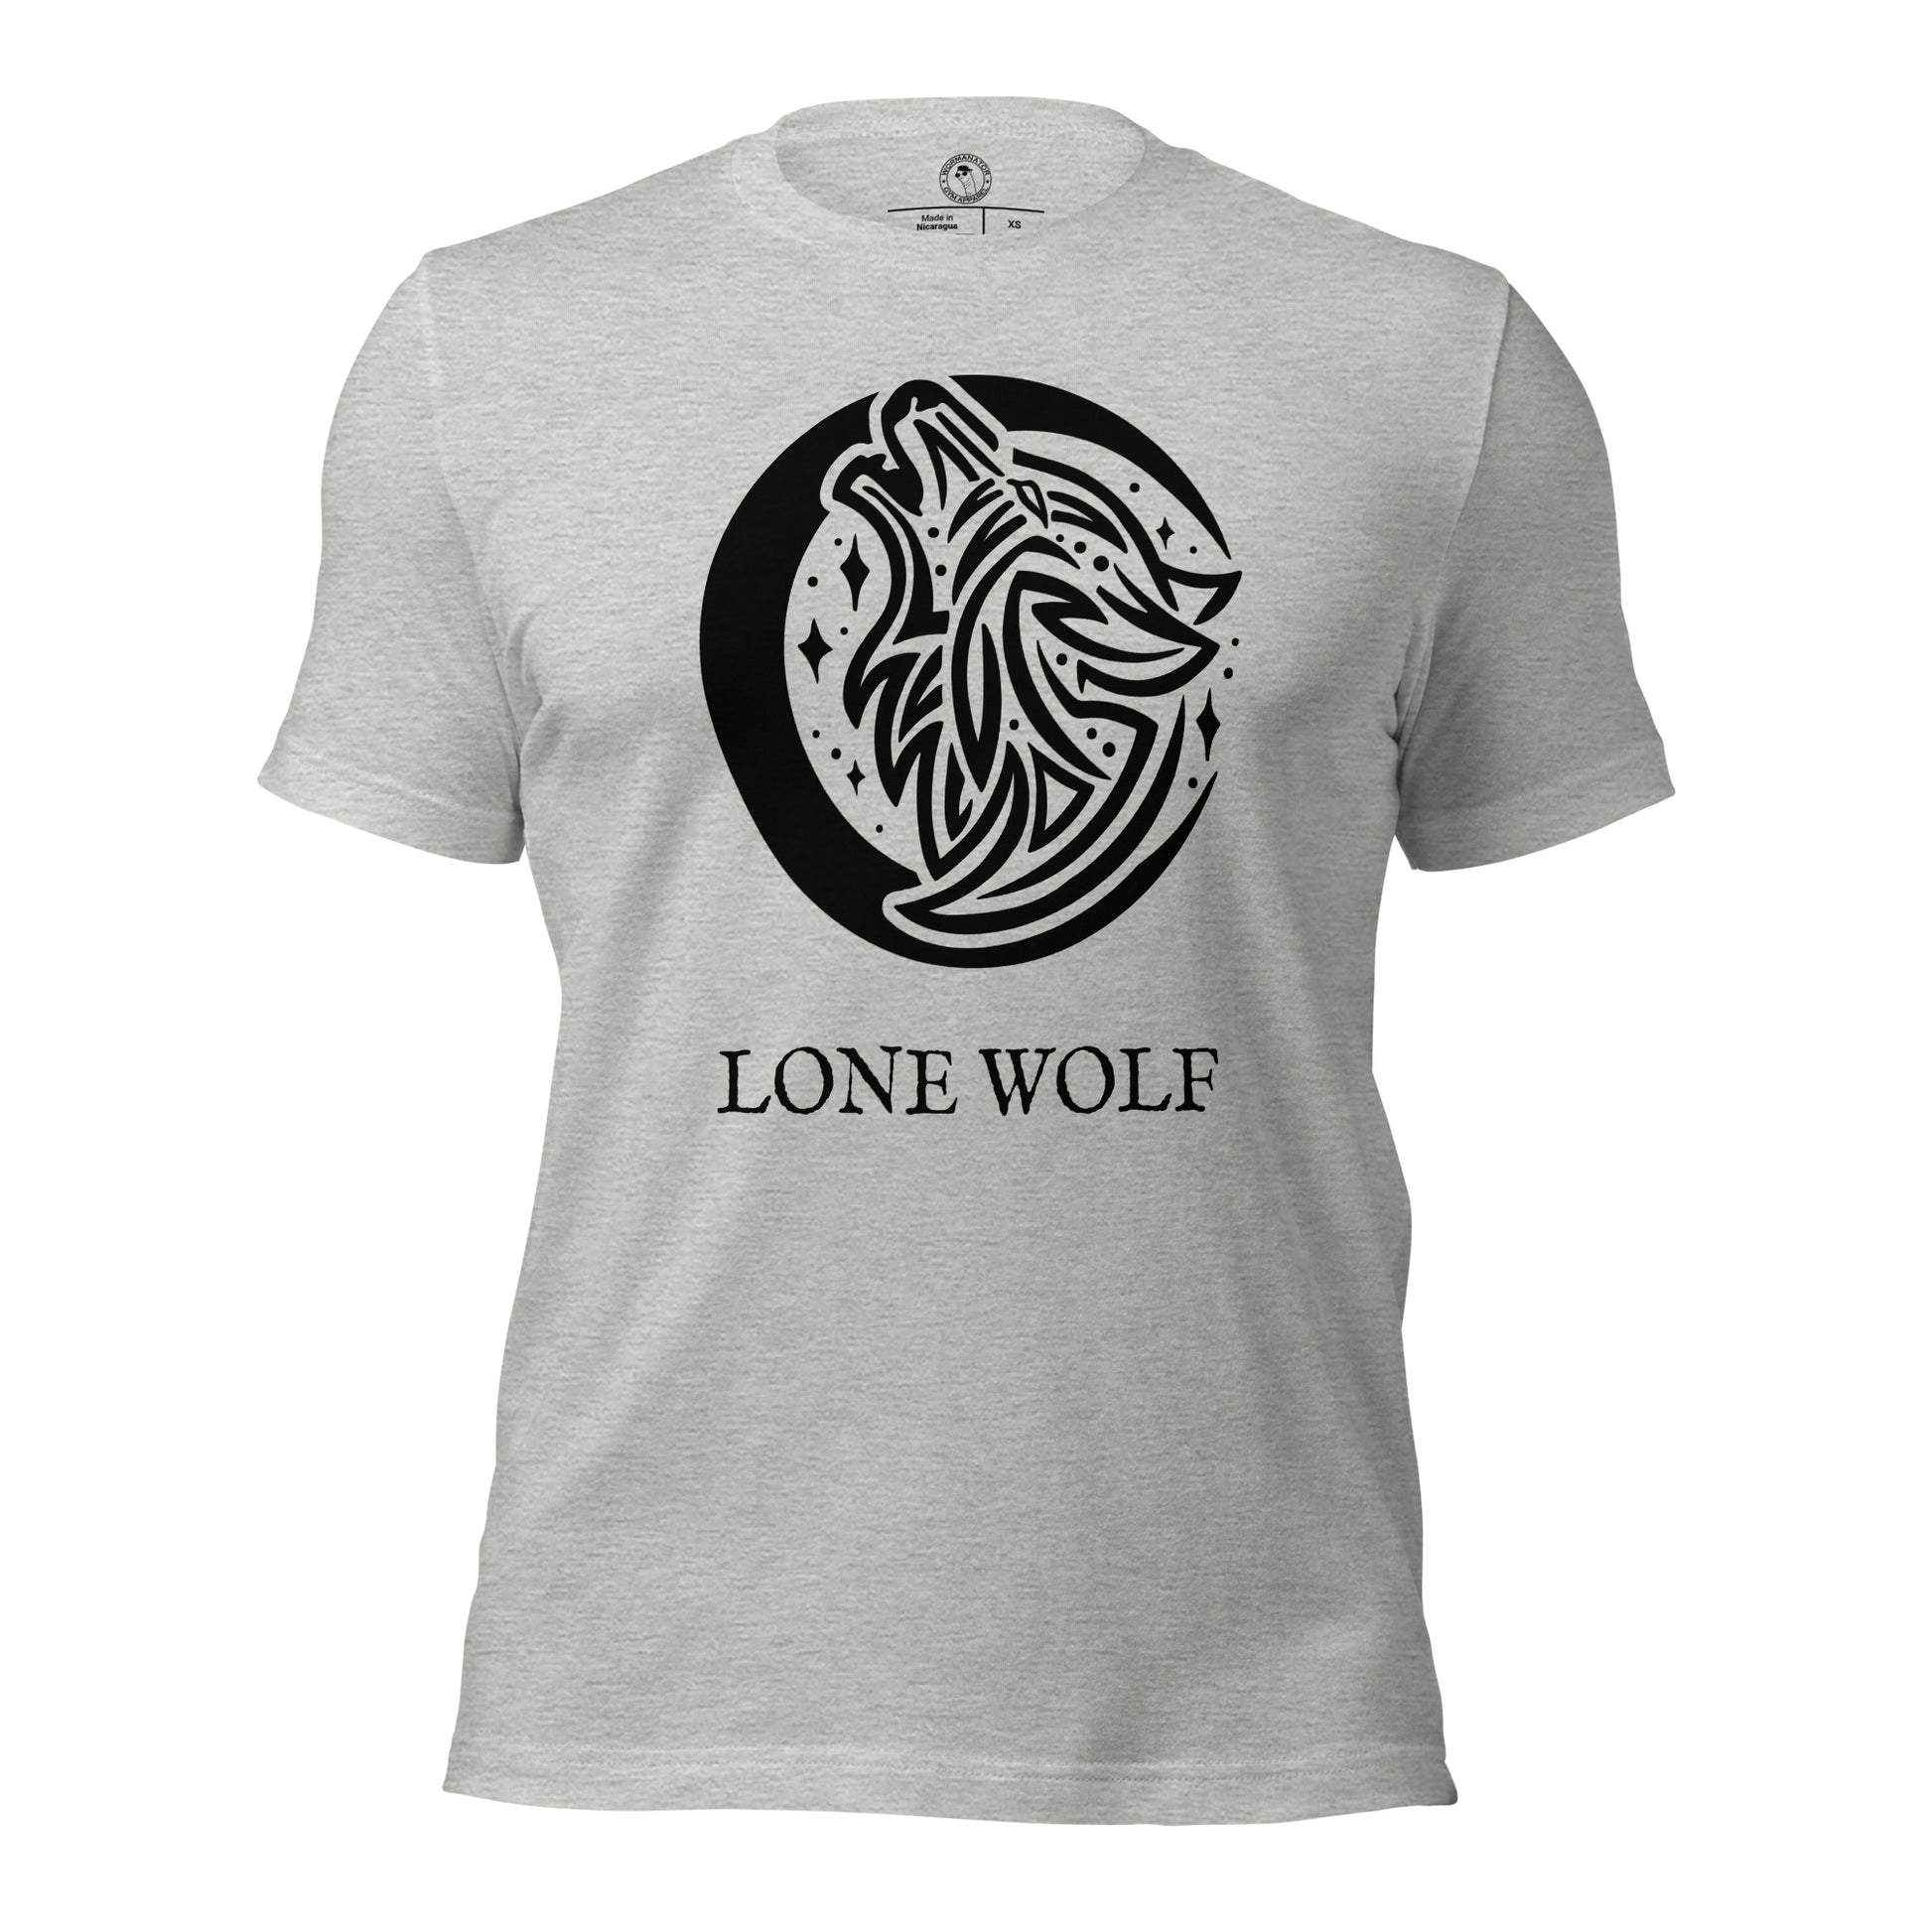 Lone Wolf Shirt in Athletic Heather